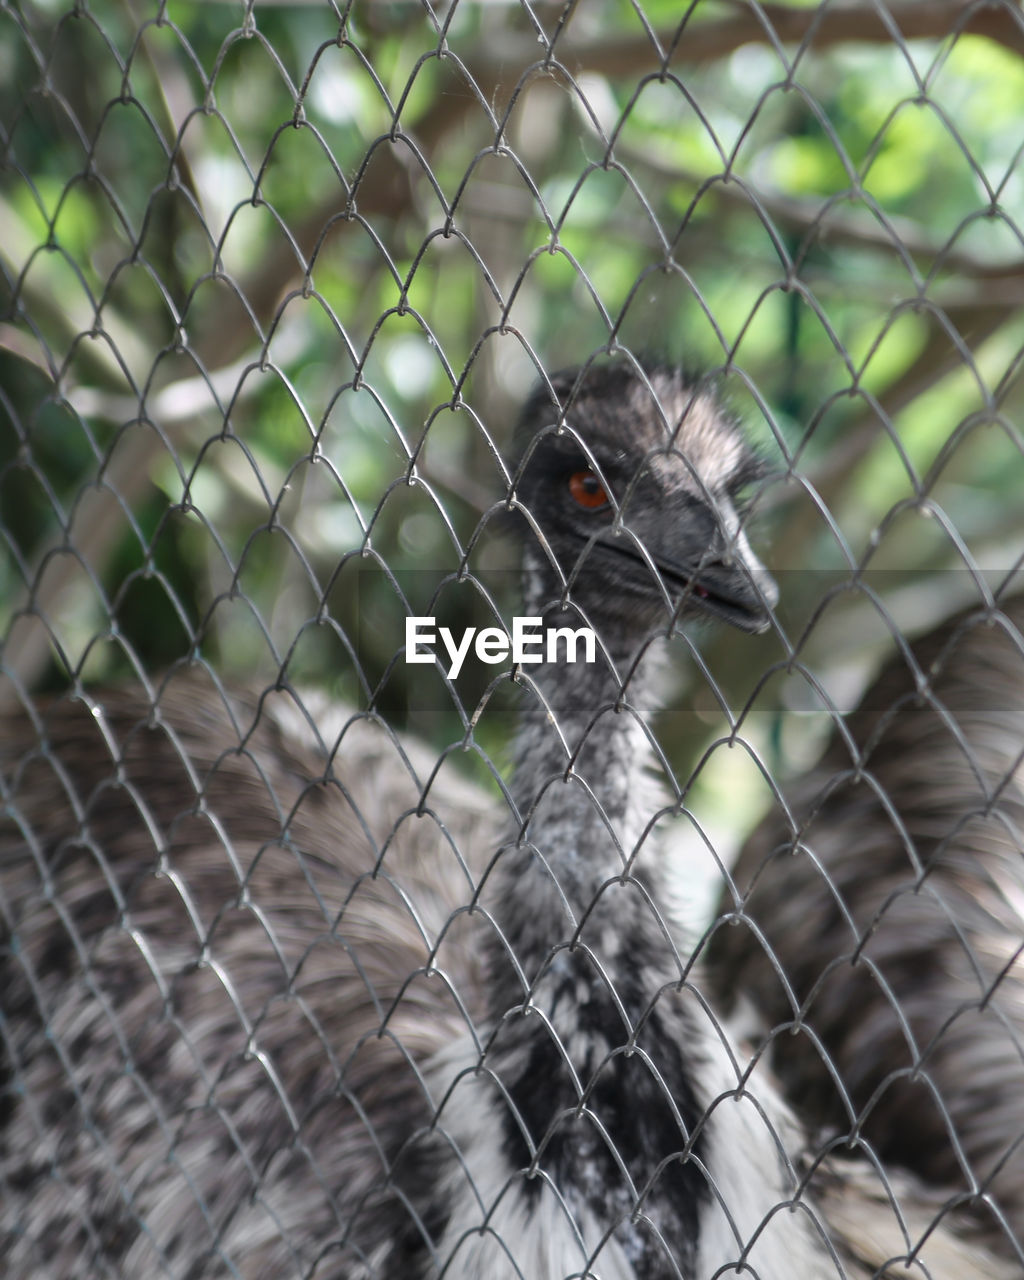 animal themes, animal, fence, one animal, chainlink fence, bird, animal wildlife, wildlife, no people, focus on foreground, security, day, protection, nature, zoo, animals in captivity, outdoors, mammal, close-up, beak, looking